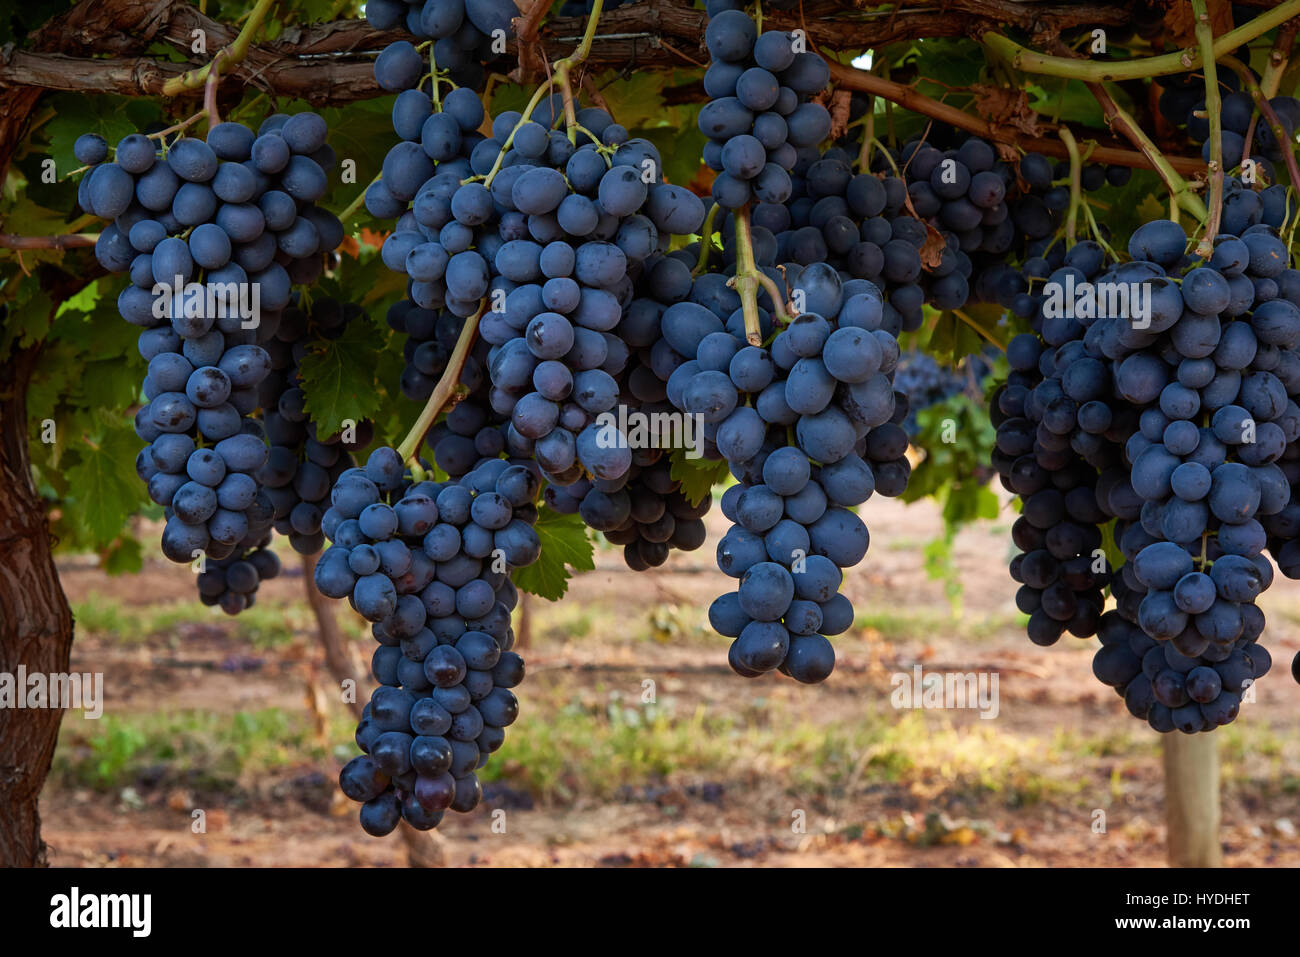 Adora Seedless grapes hanging on vines, near Robinvale, Victoria, Australia This is a PBR variety, licensed by Sun World. Stock Photo